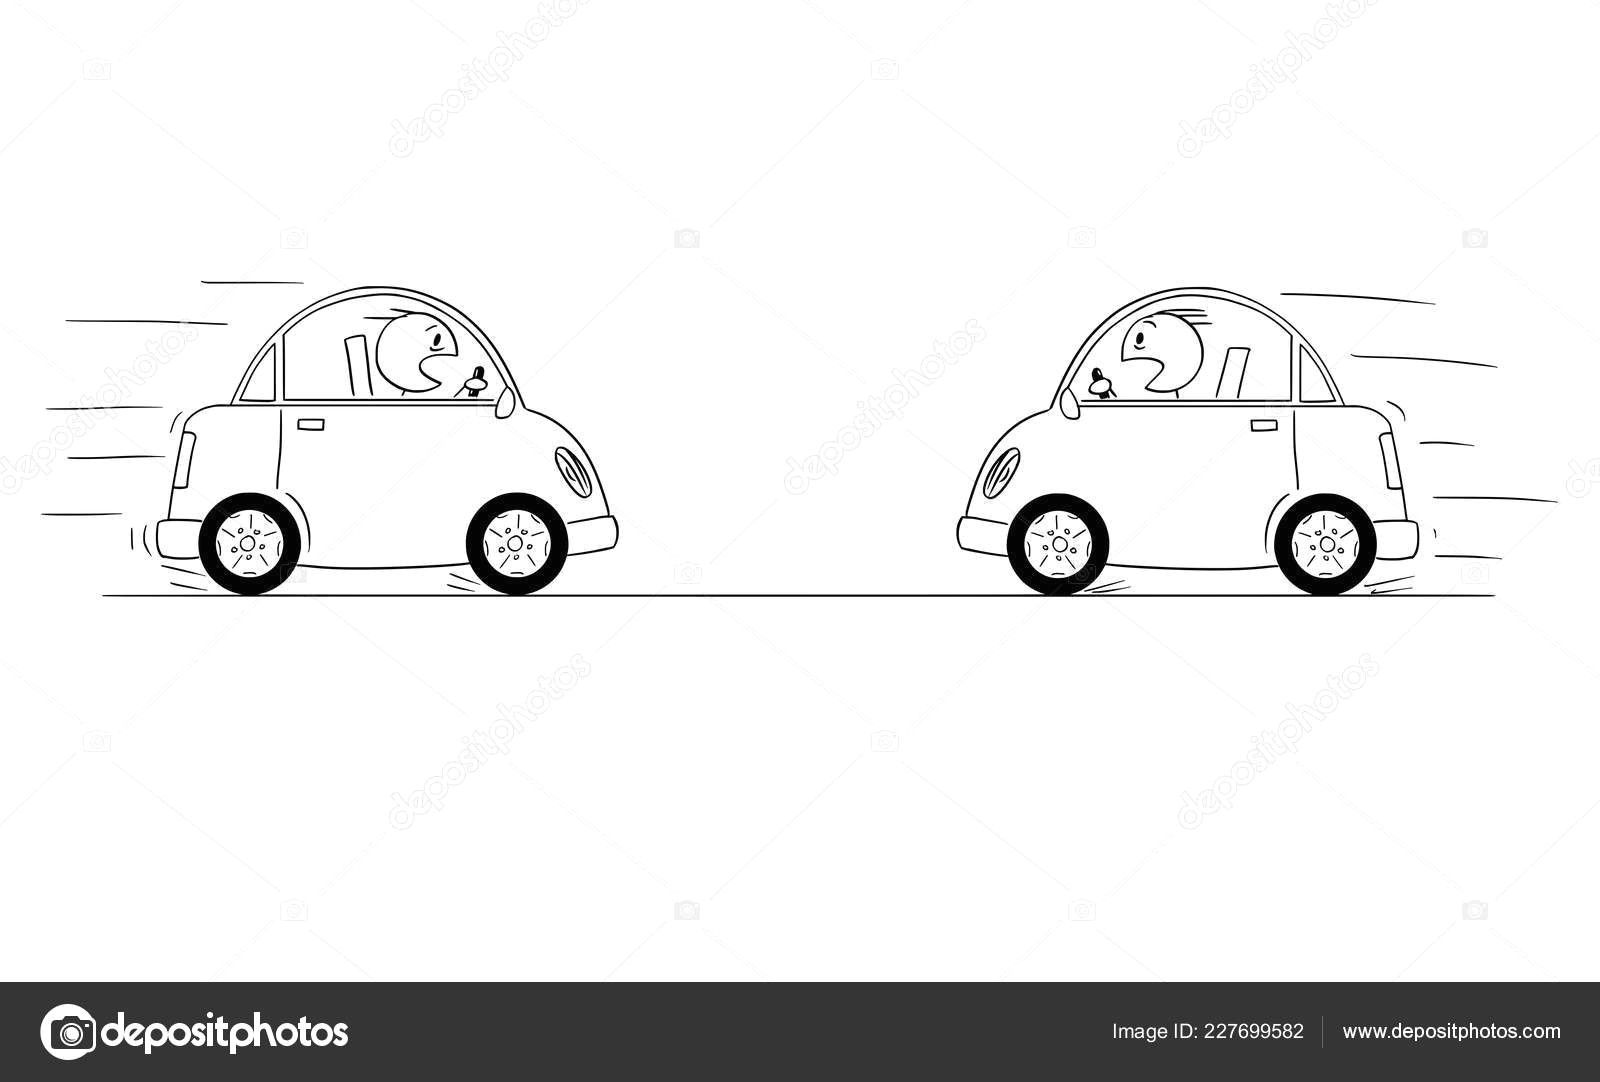 Unduh Drawing Cartoons 2 Cartoon Drawing Od Two Cars Driving Against Each Other Just Moments